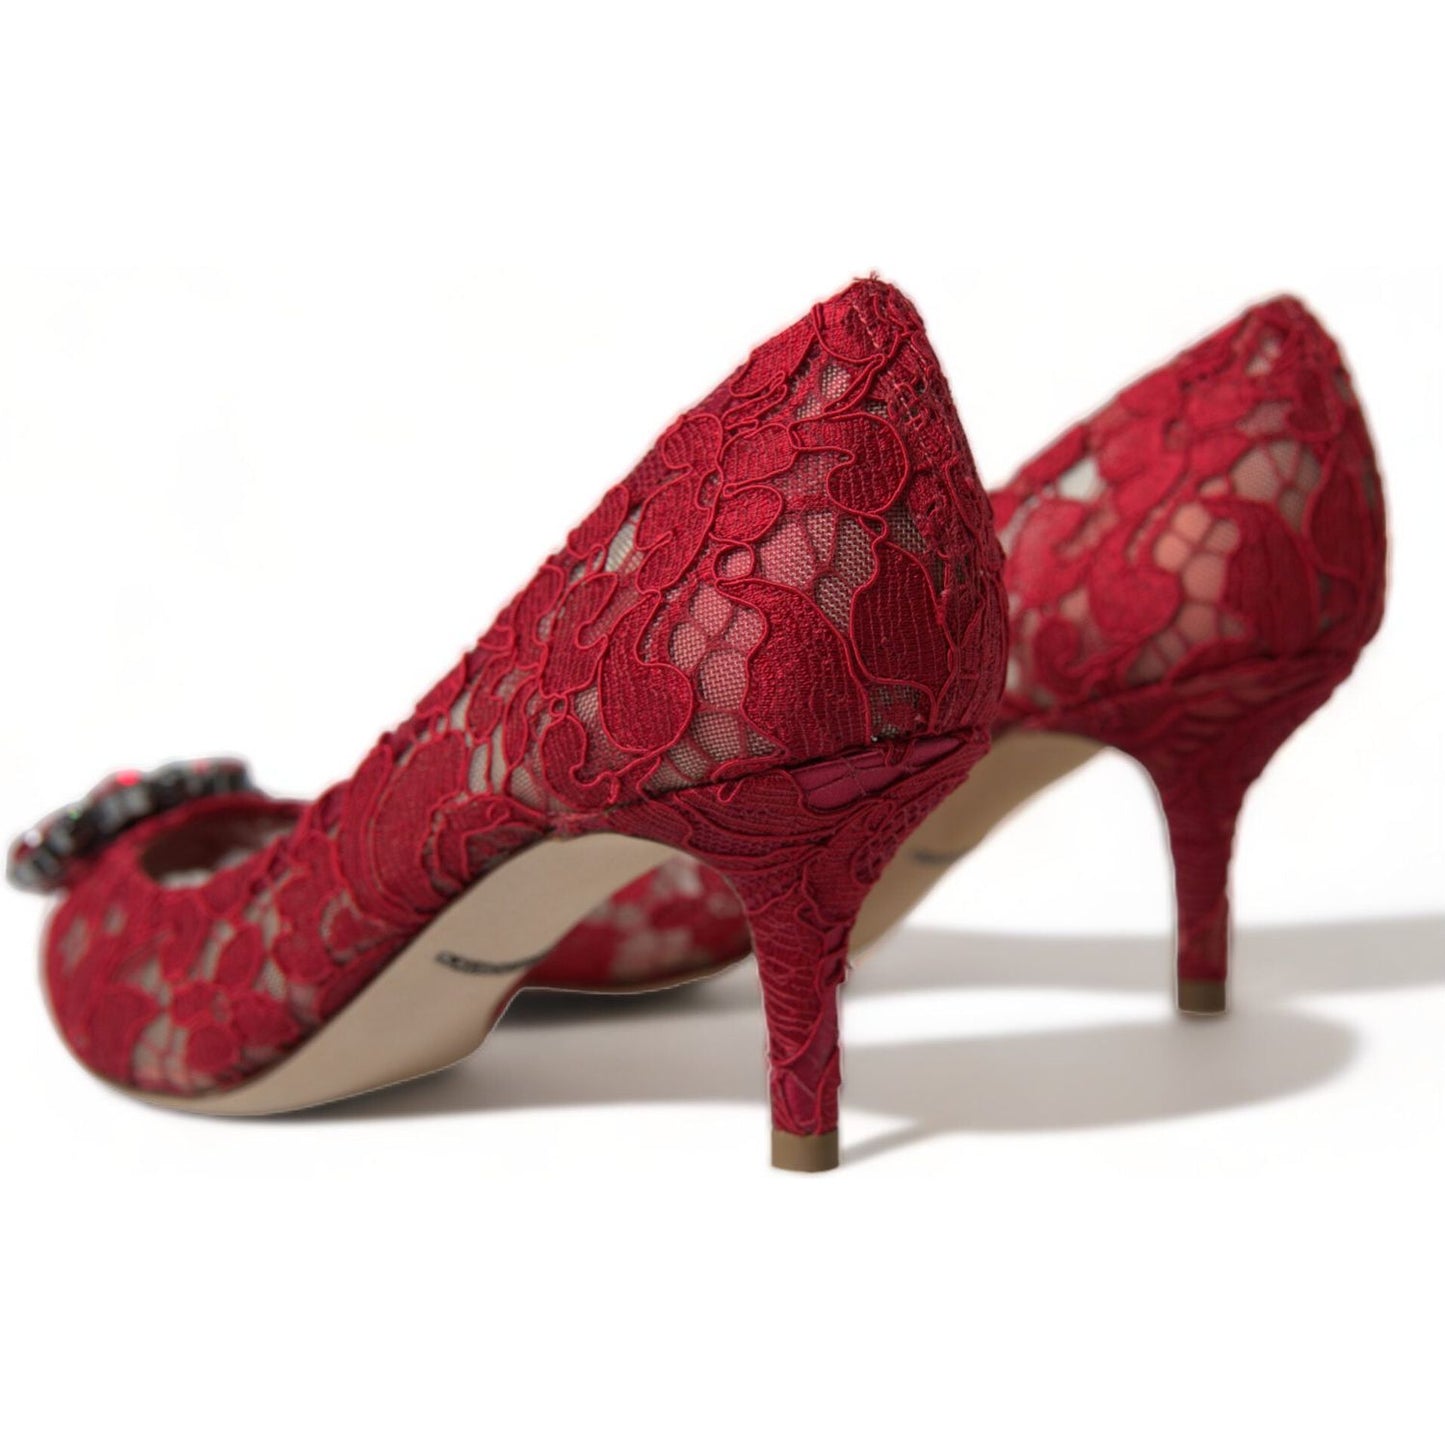 Dolce & Gabbana Radiant Red Lace Heels with Crystals red-taormina-lace-crystal-heels-pumps-shoes-2